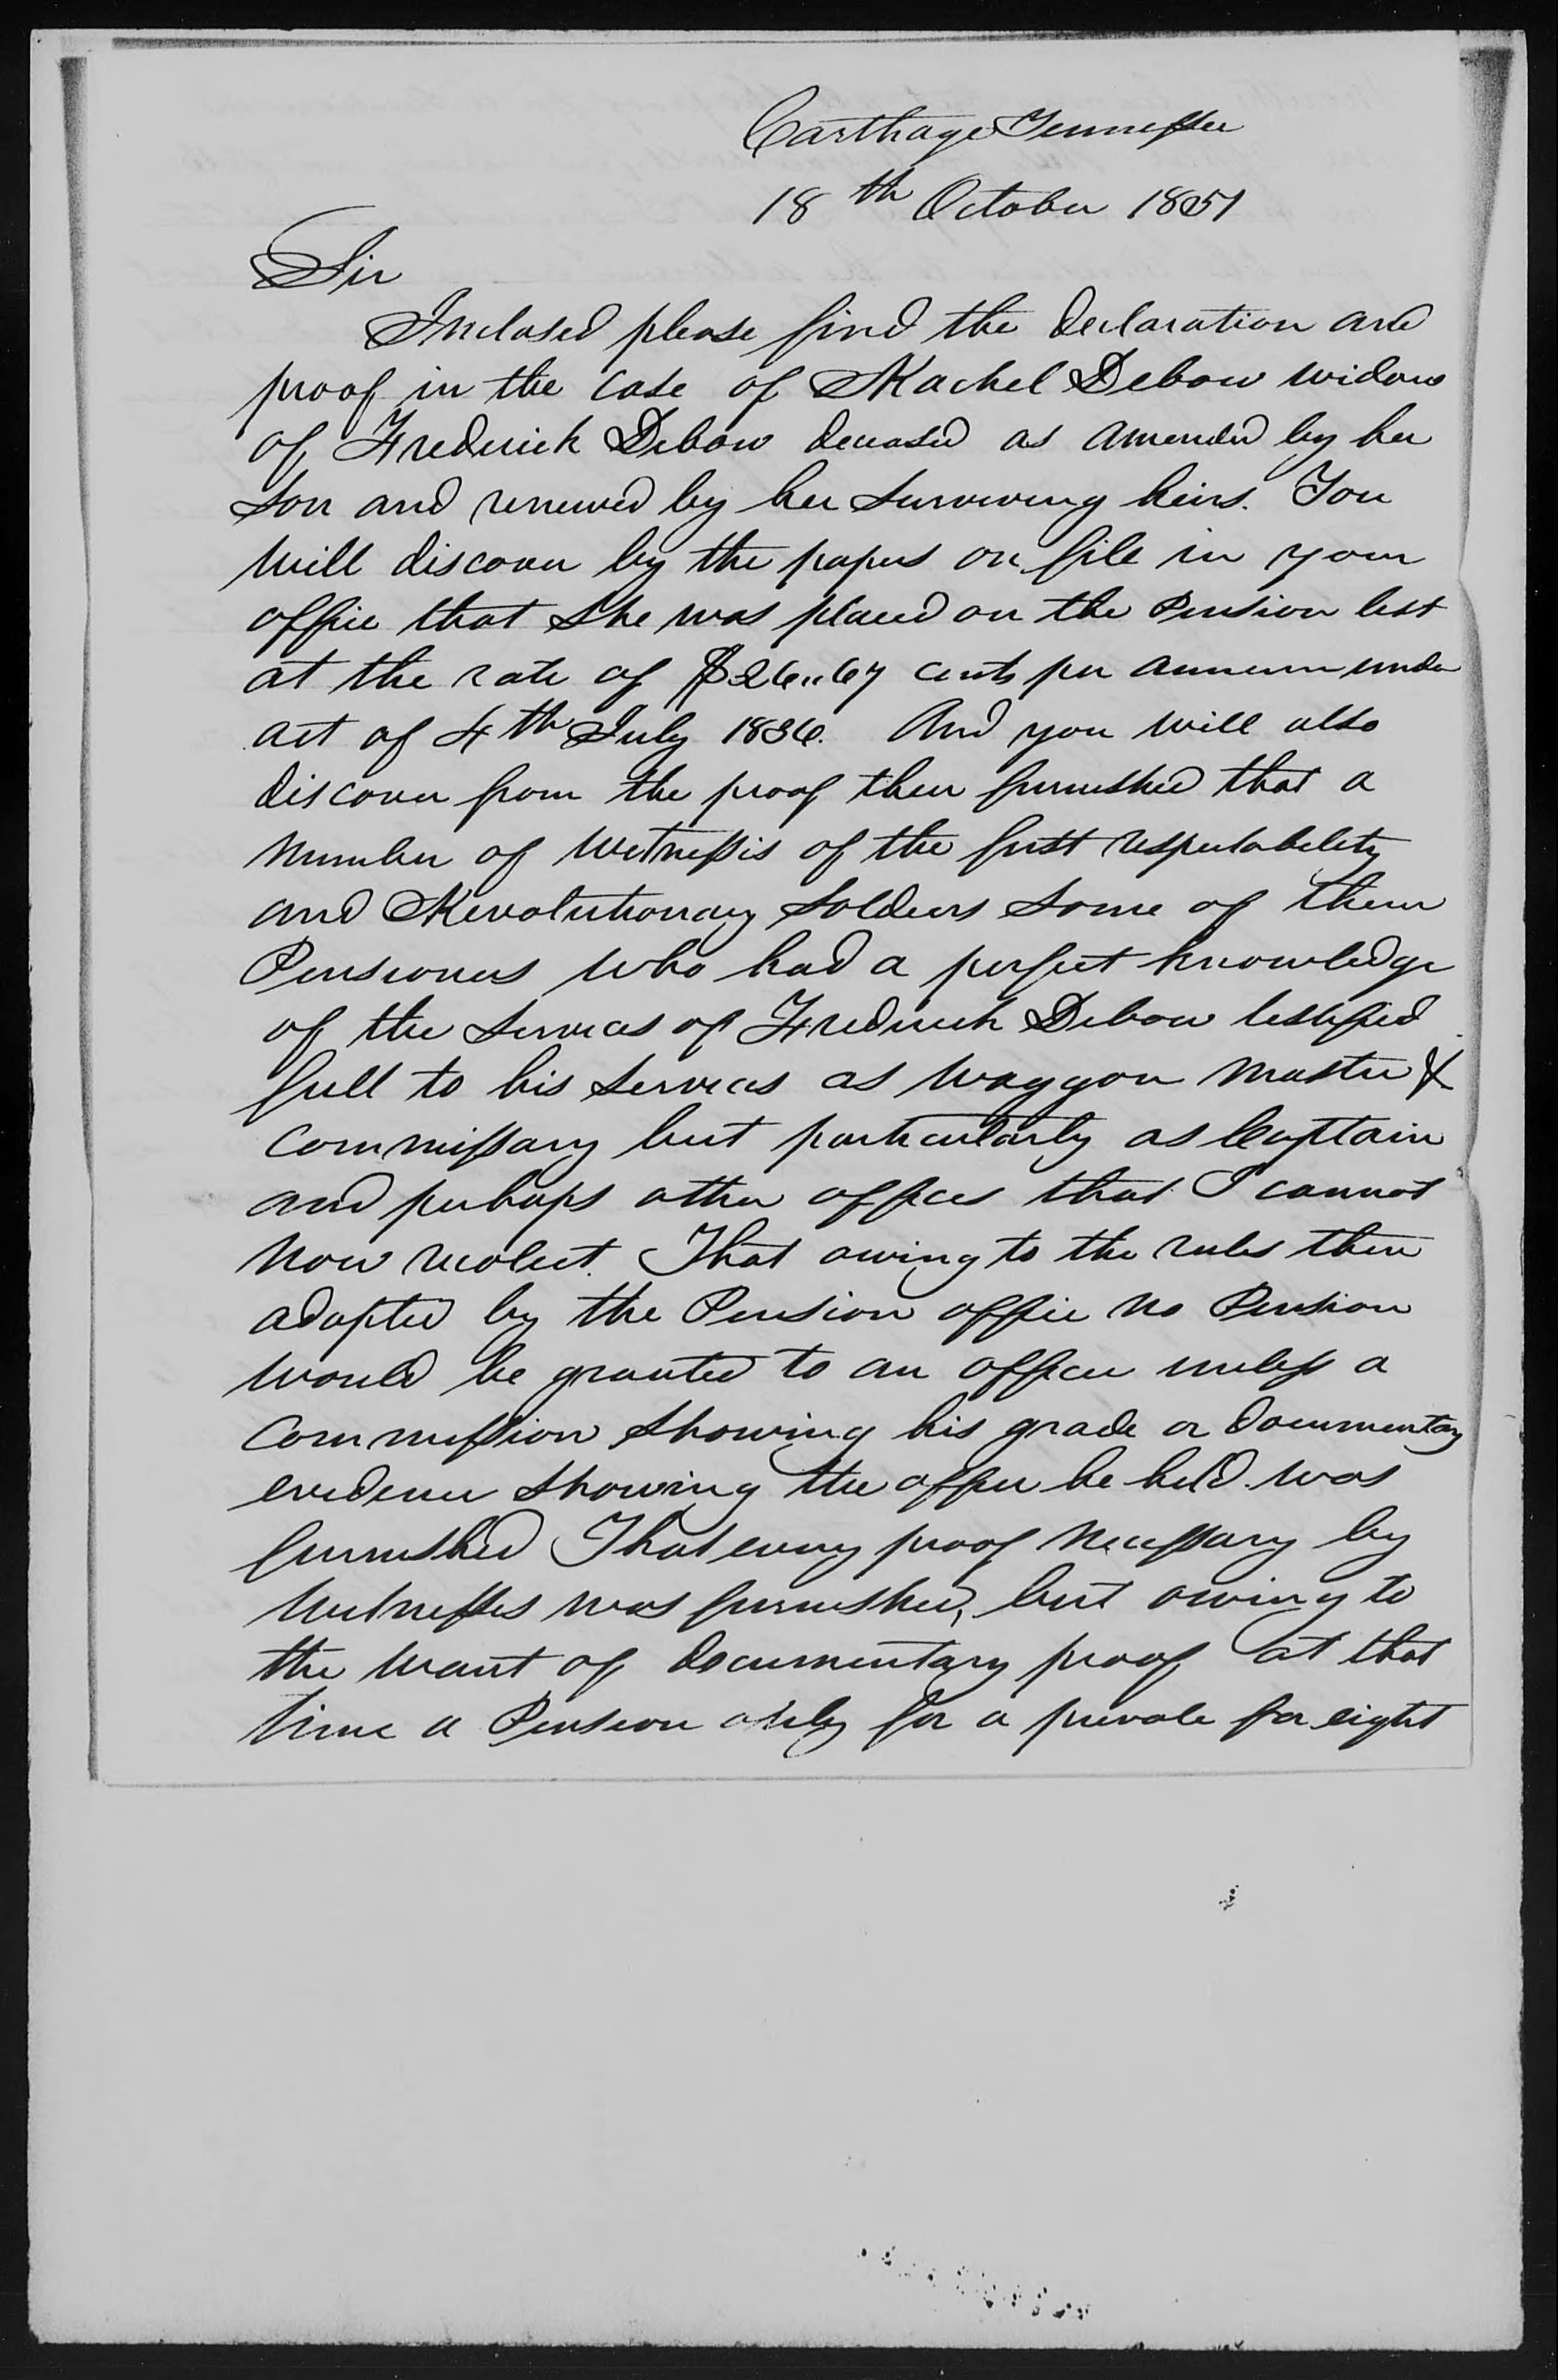  Letter from Adam Ferguson to James Ewell Heath, 18 October 1851, page 1